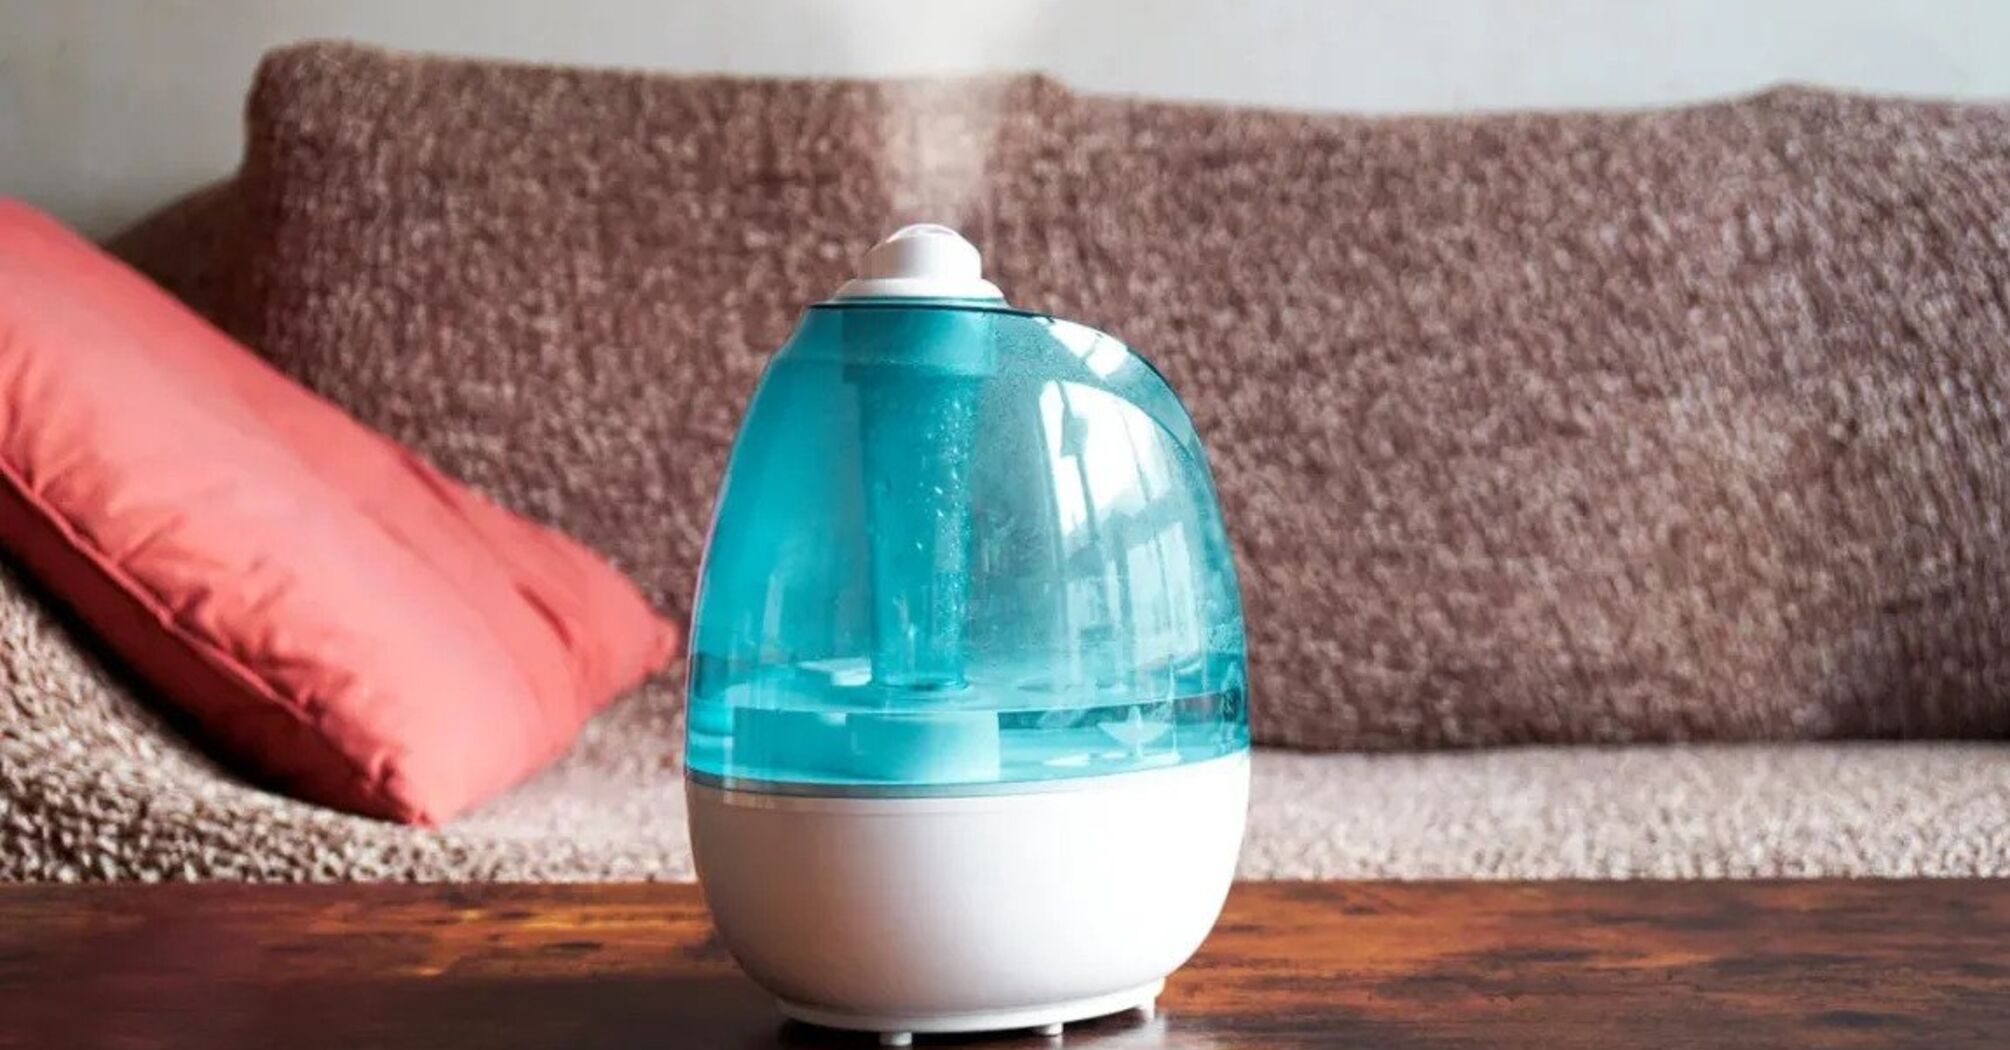 Do air humidifiers needed